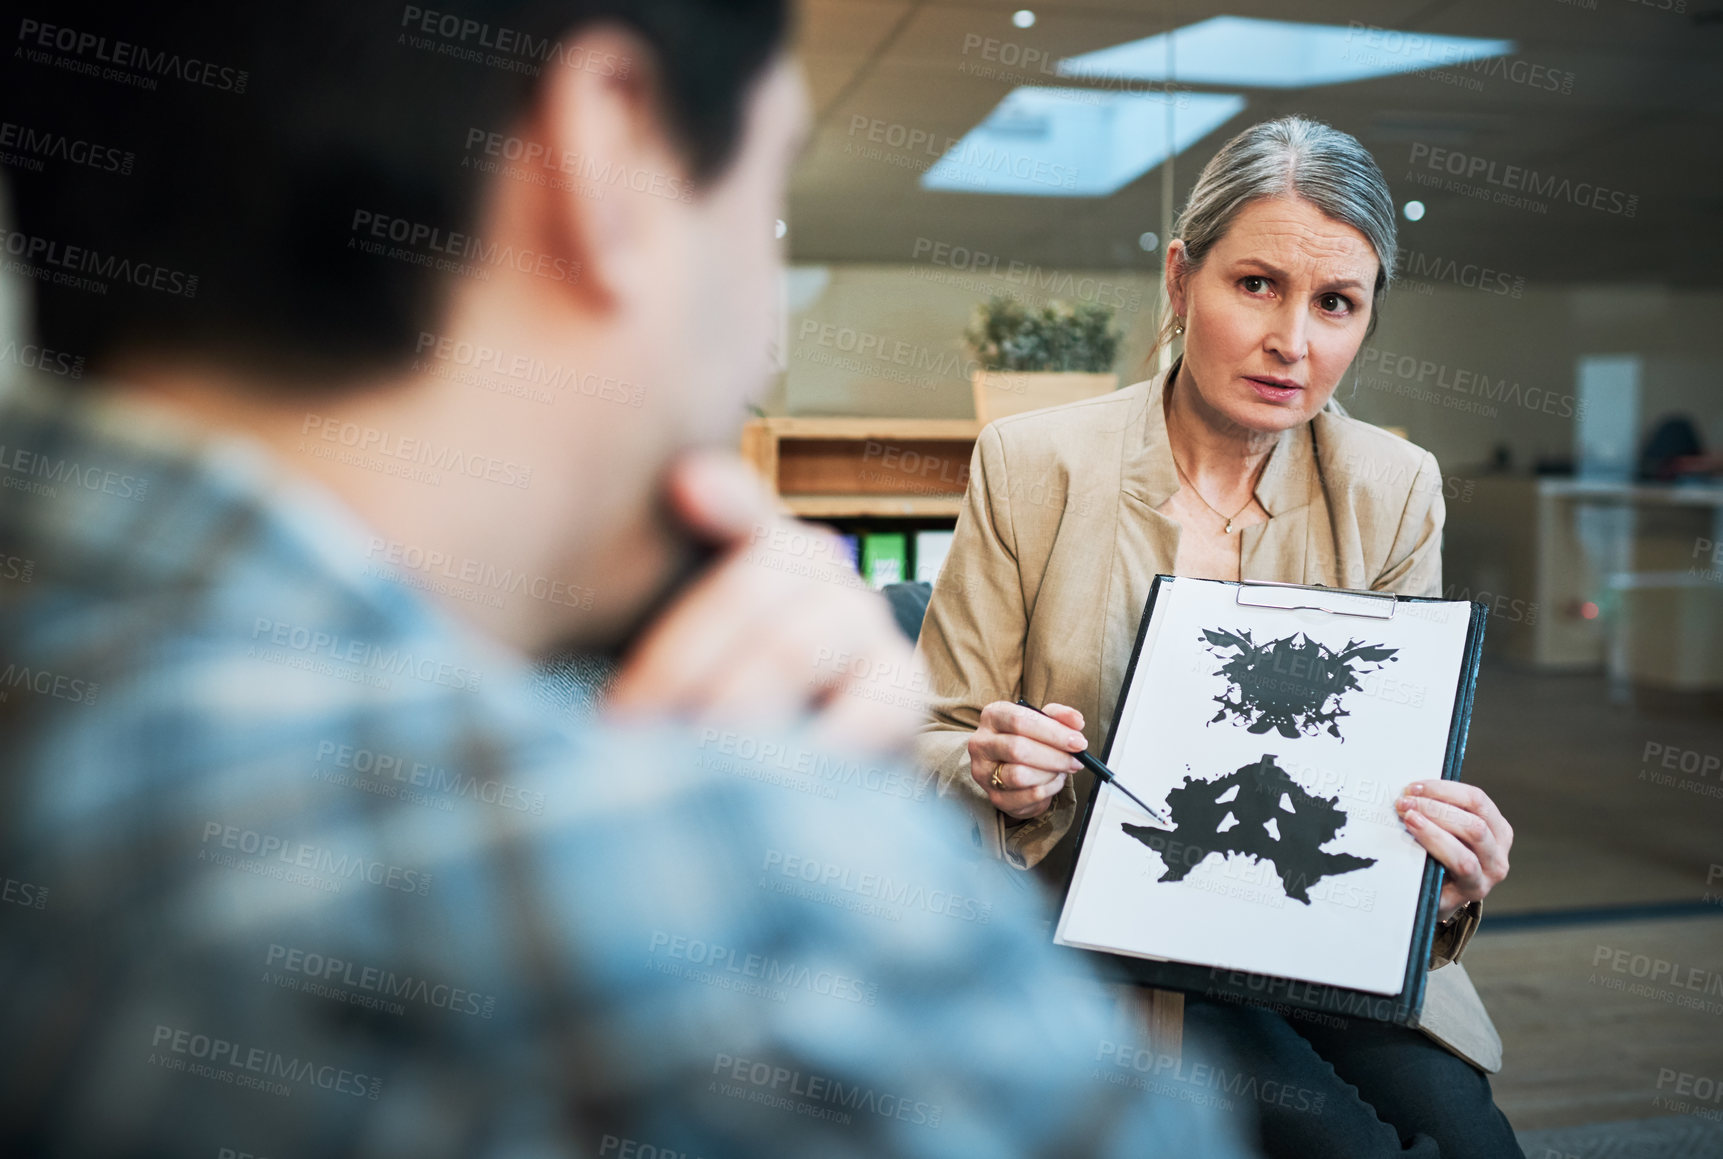 Buy stock photo Shot of a mature psychologist conducting an inkblot test with her patient during a therapeutic session